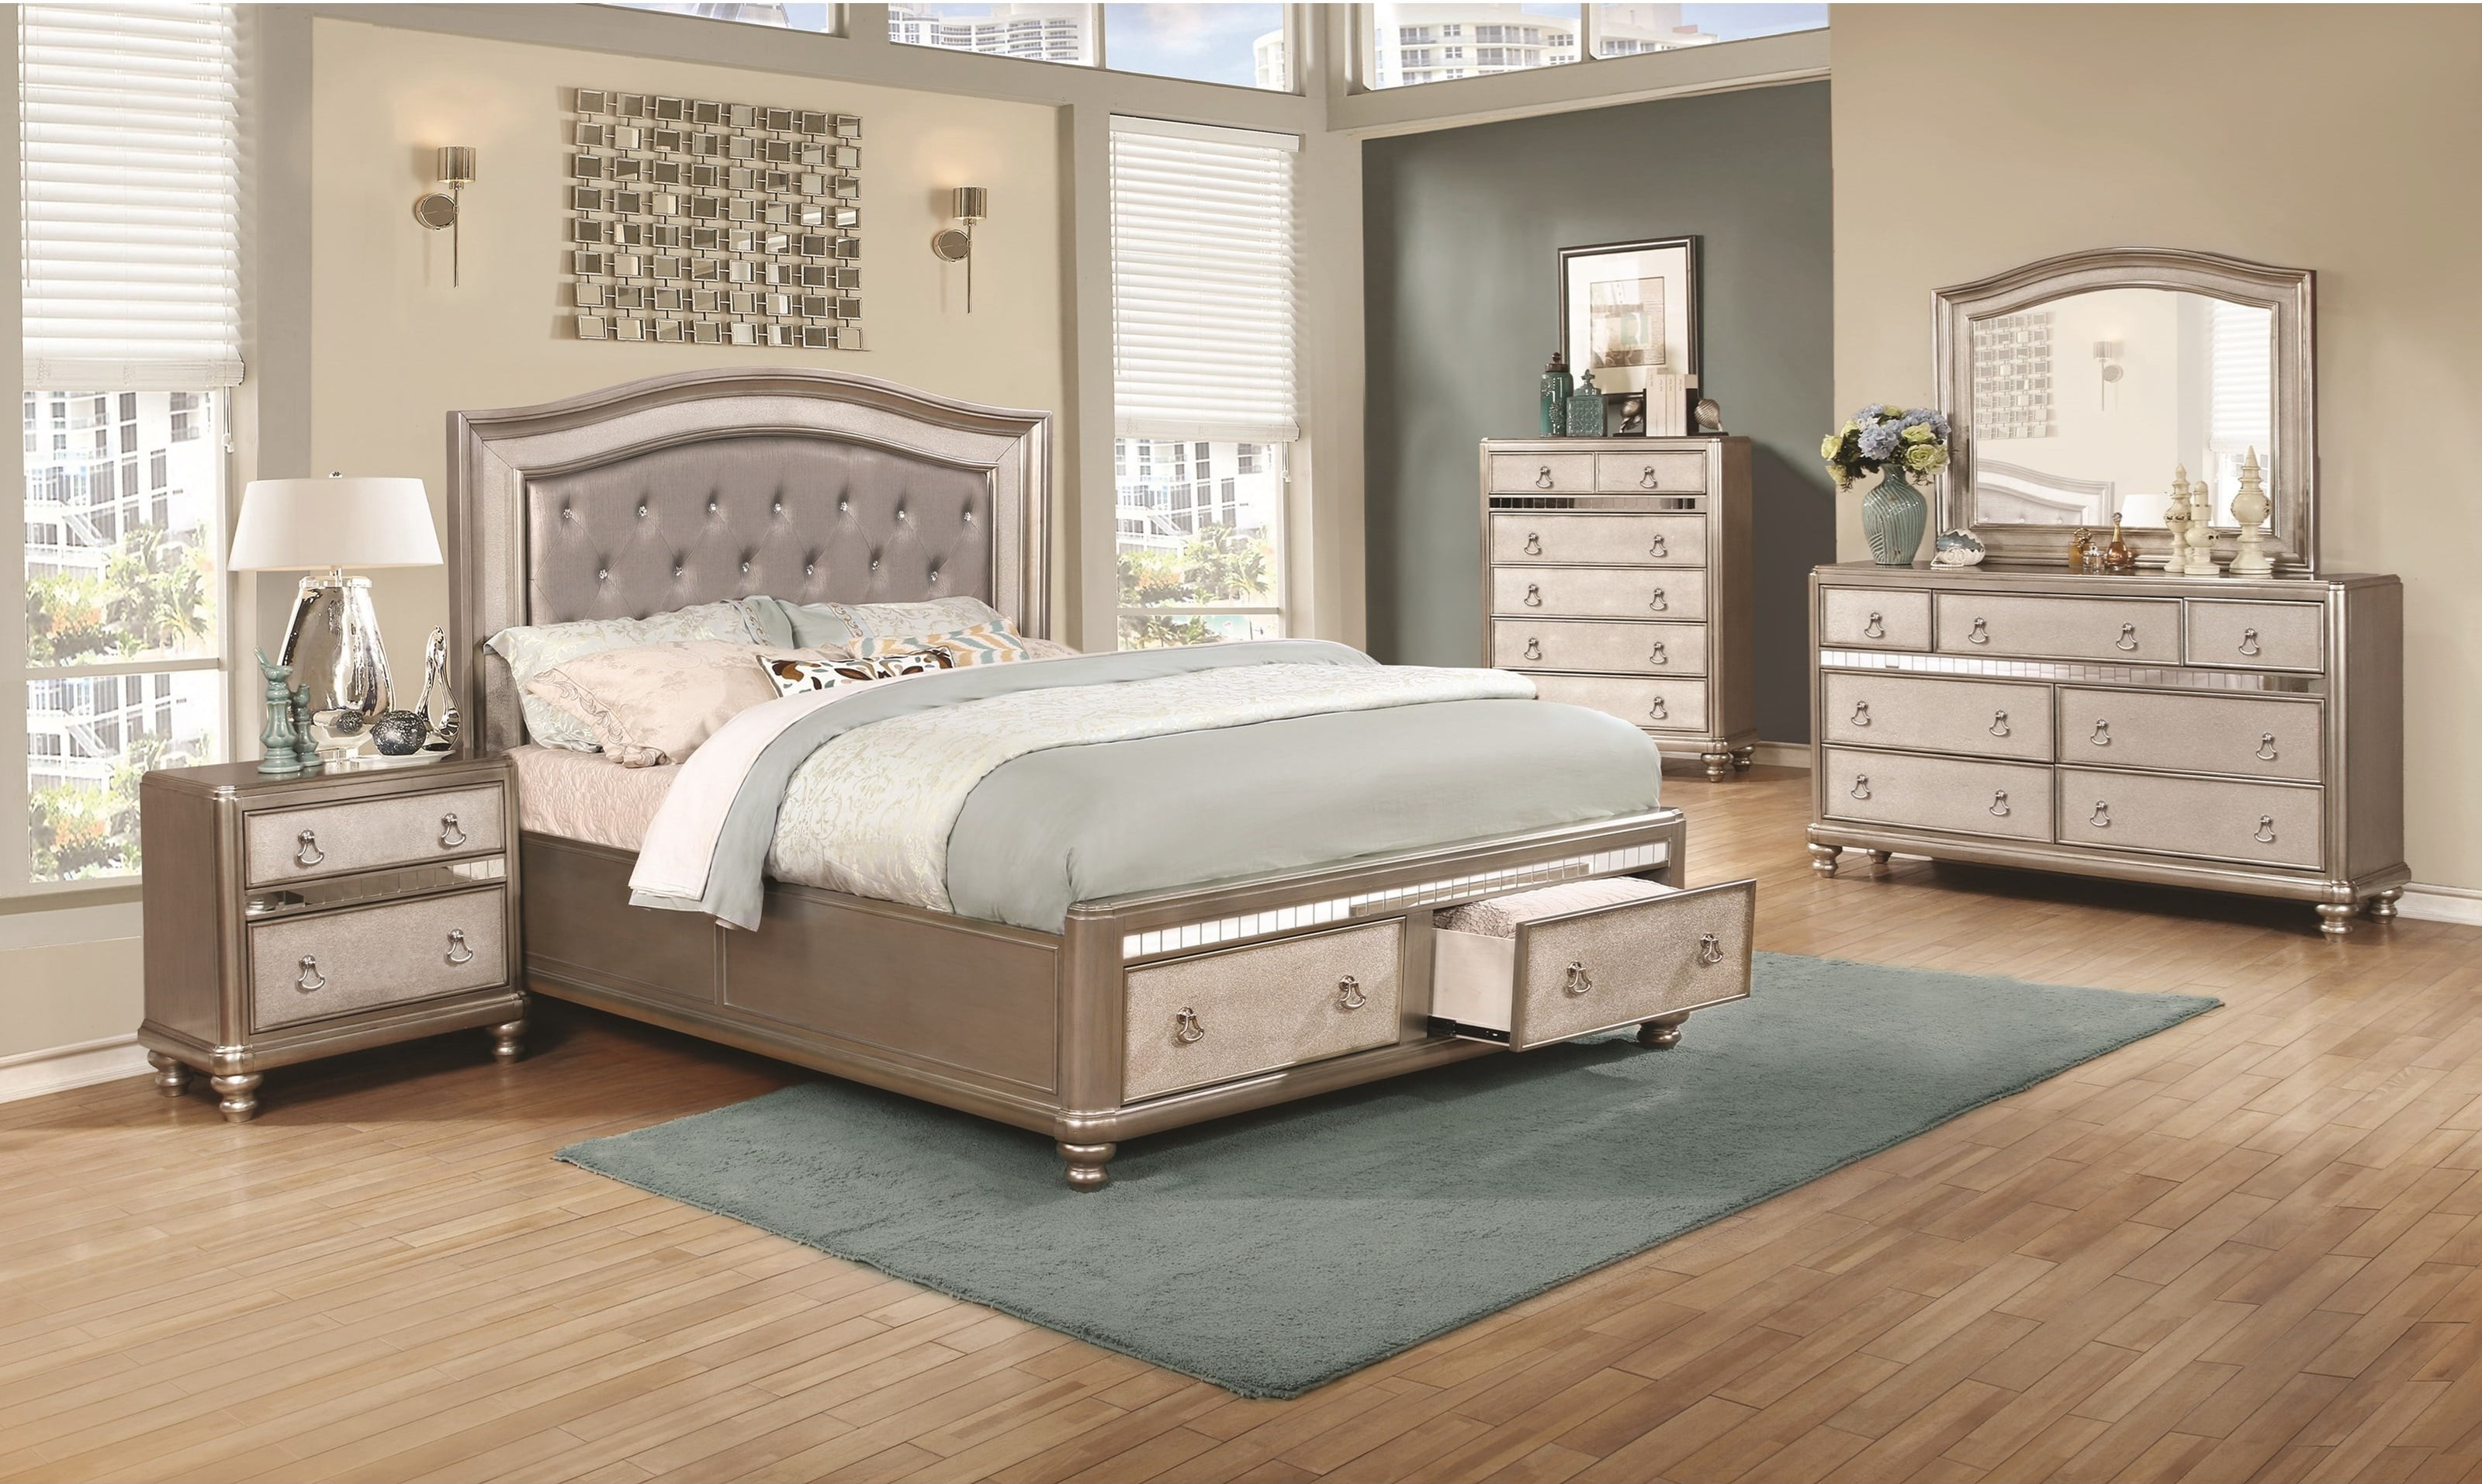 king bedroom furniture set with armoire